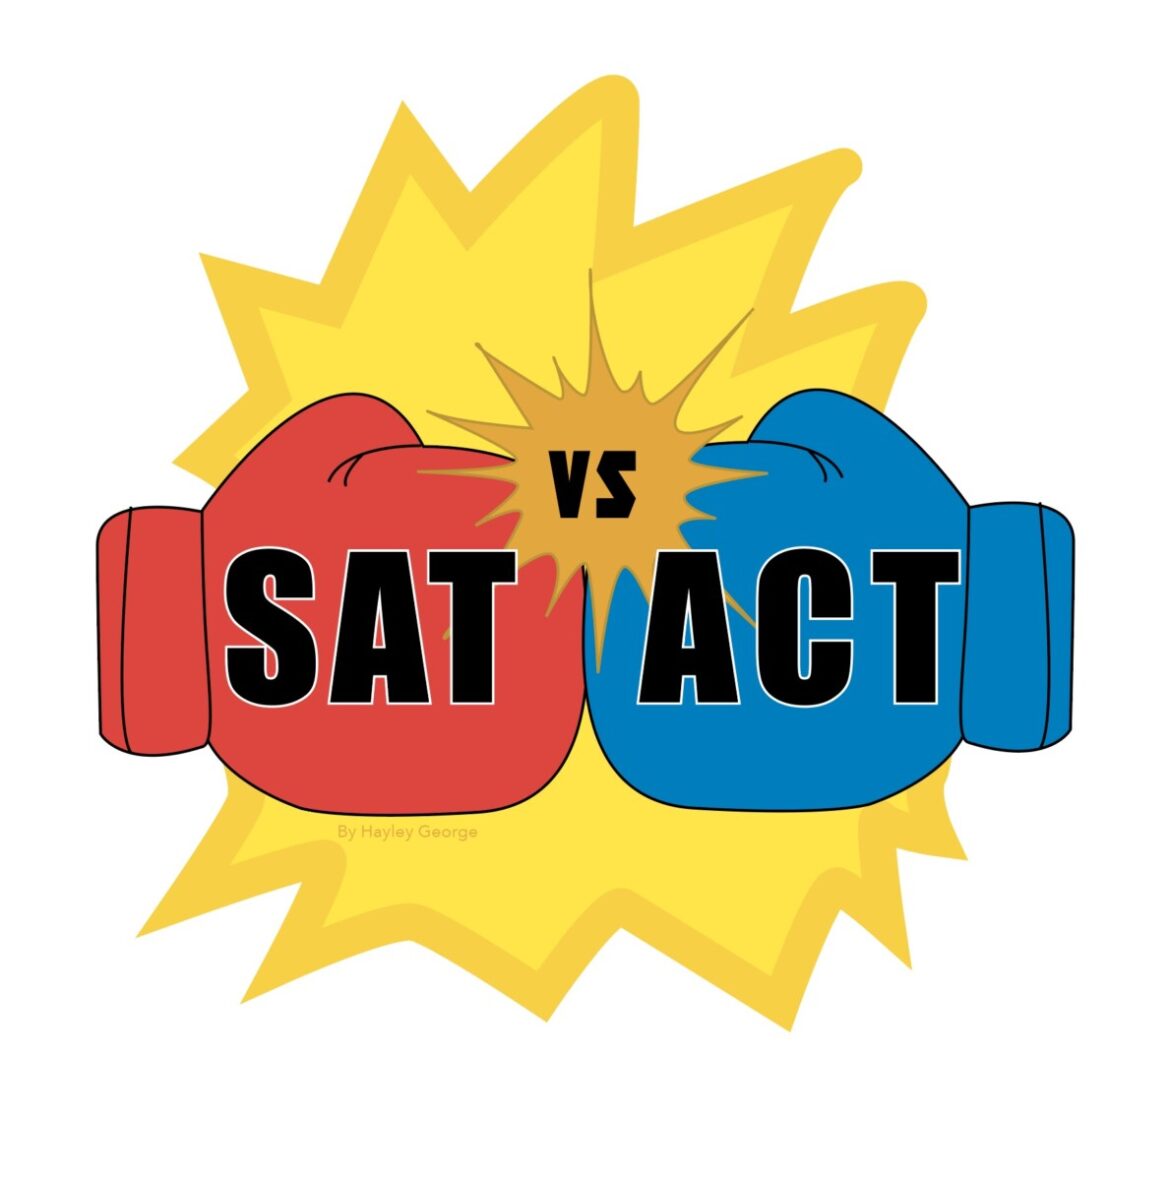 The battle of standardized tests: ACT vs. SAT